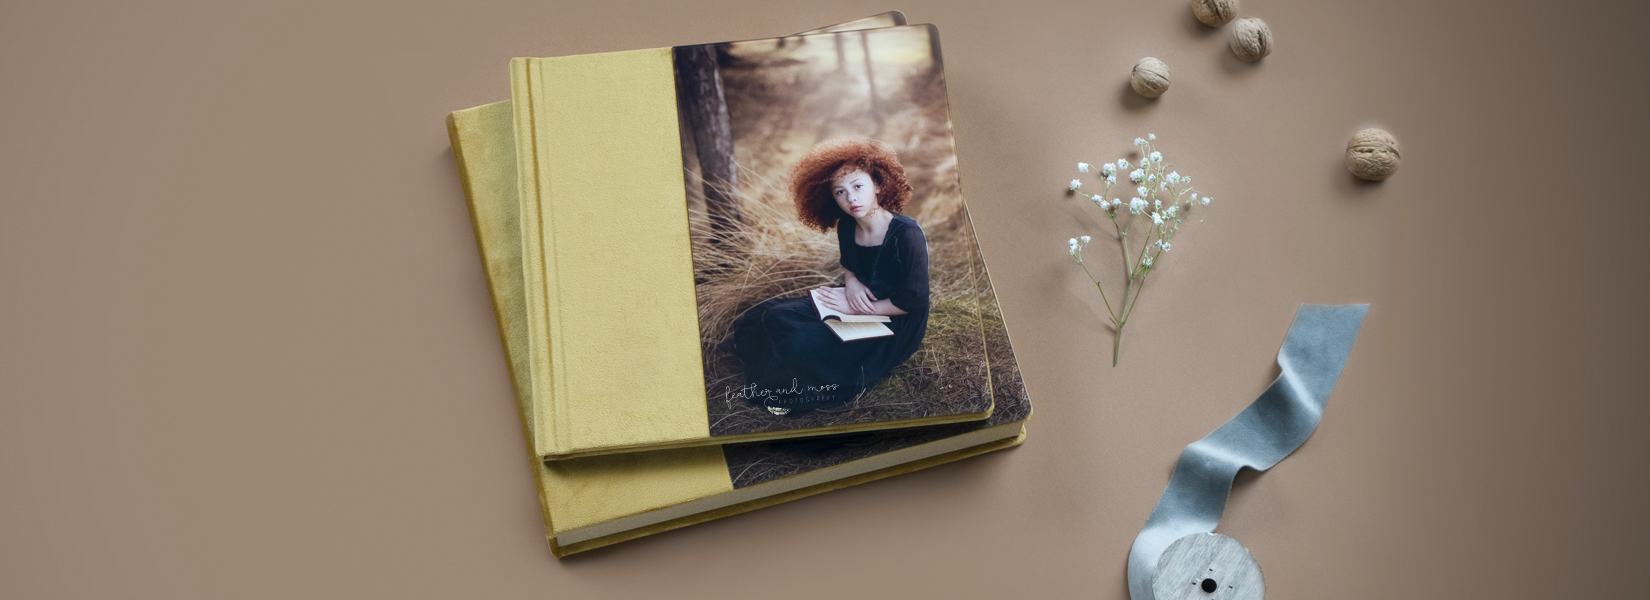 Photo Book PRO Professional Photo Book Professional print quality nphoto, professional photo books with acrylic glass cover 2